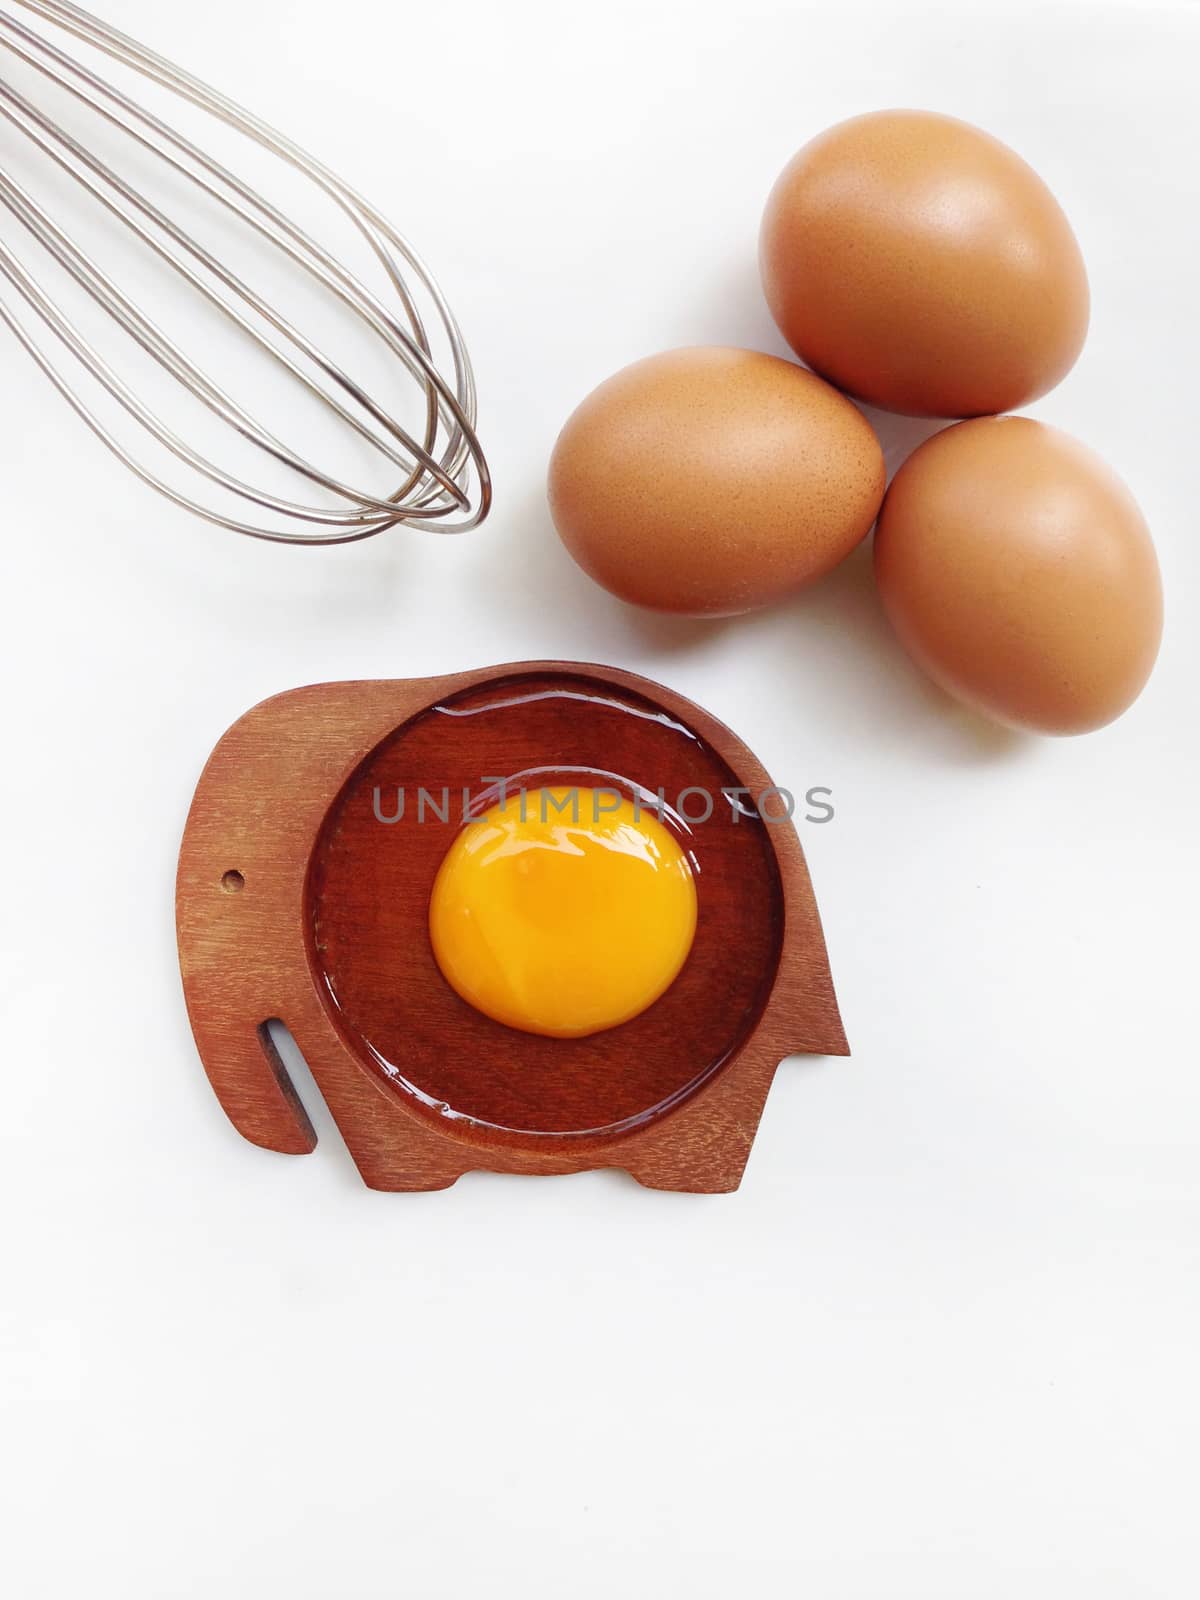 Egg yolk on wooden elephant shaped saucer with eggs and egg whis by Bowonpat